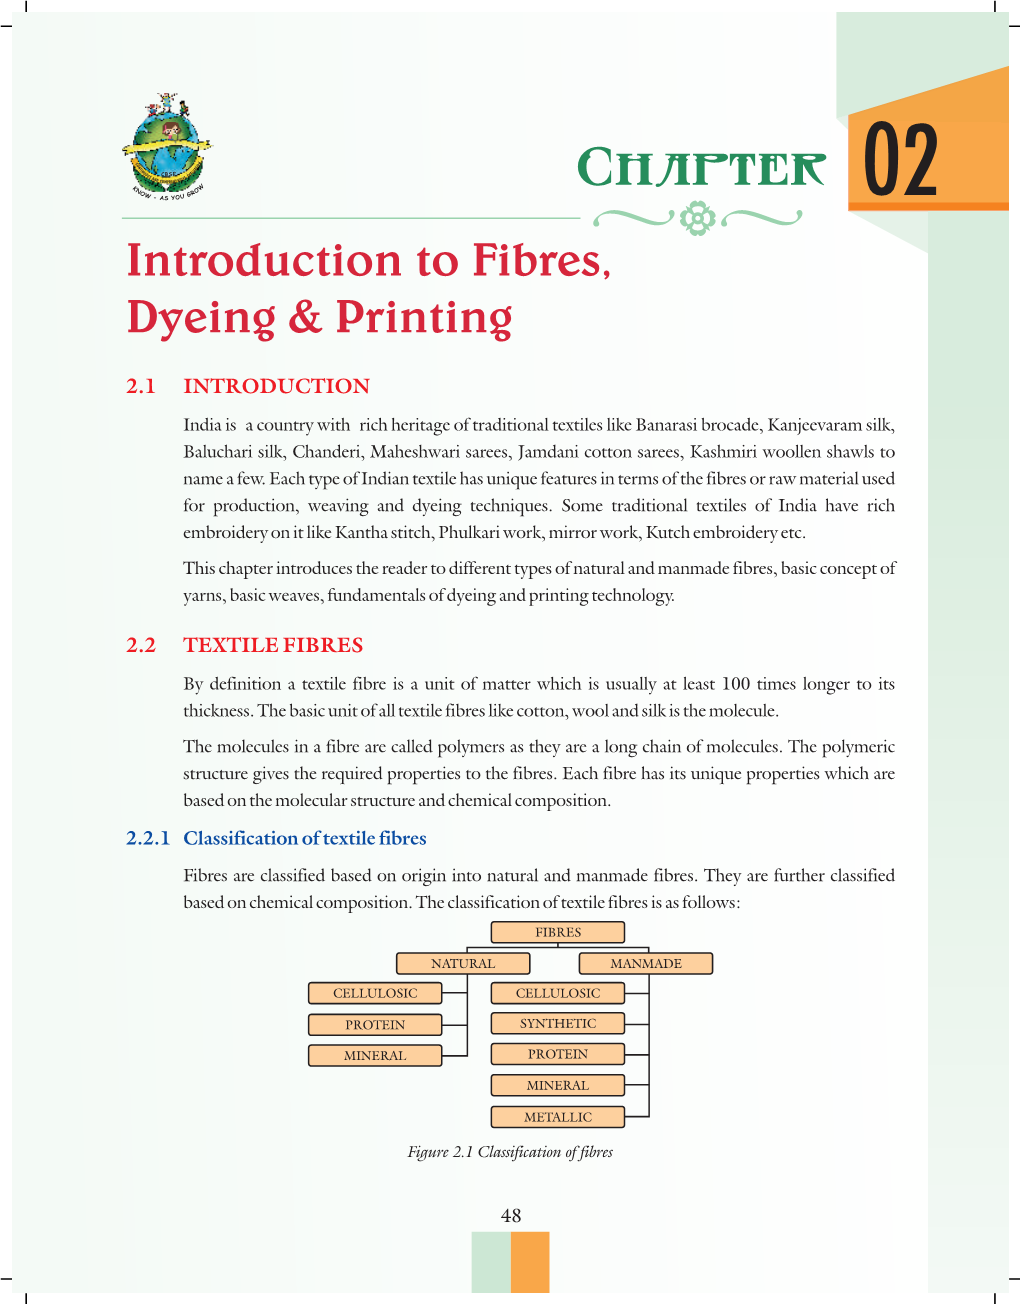 Introduction to Fibres, Dyeing & Printing